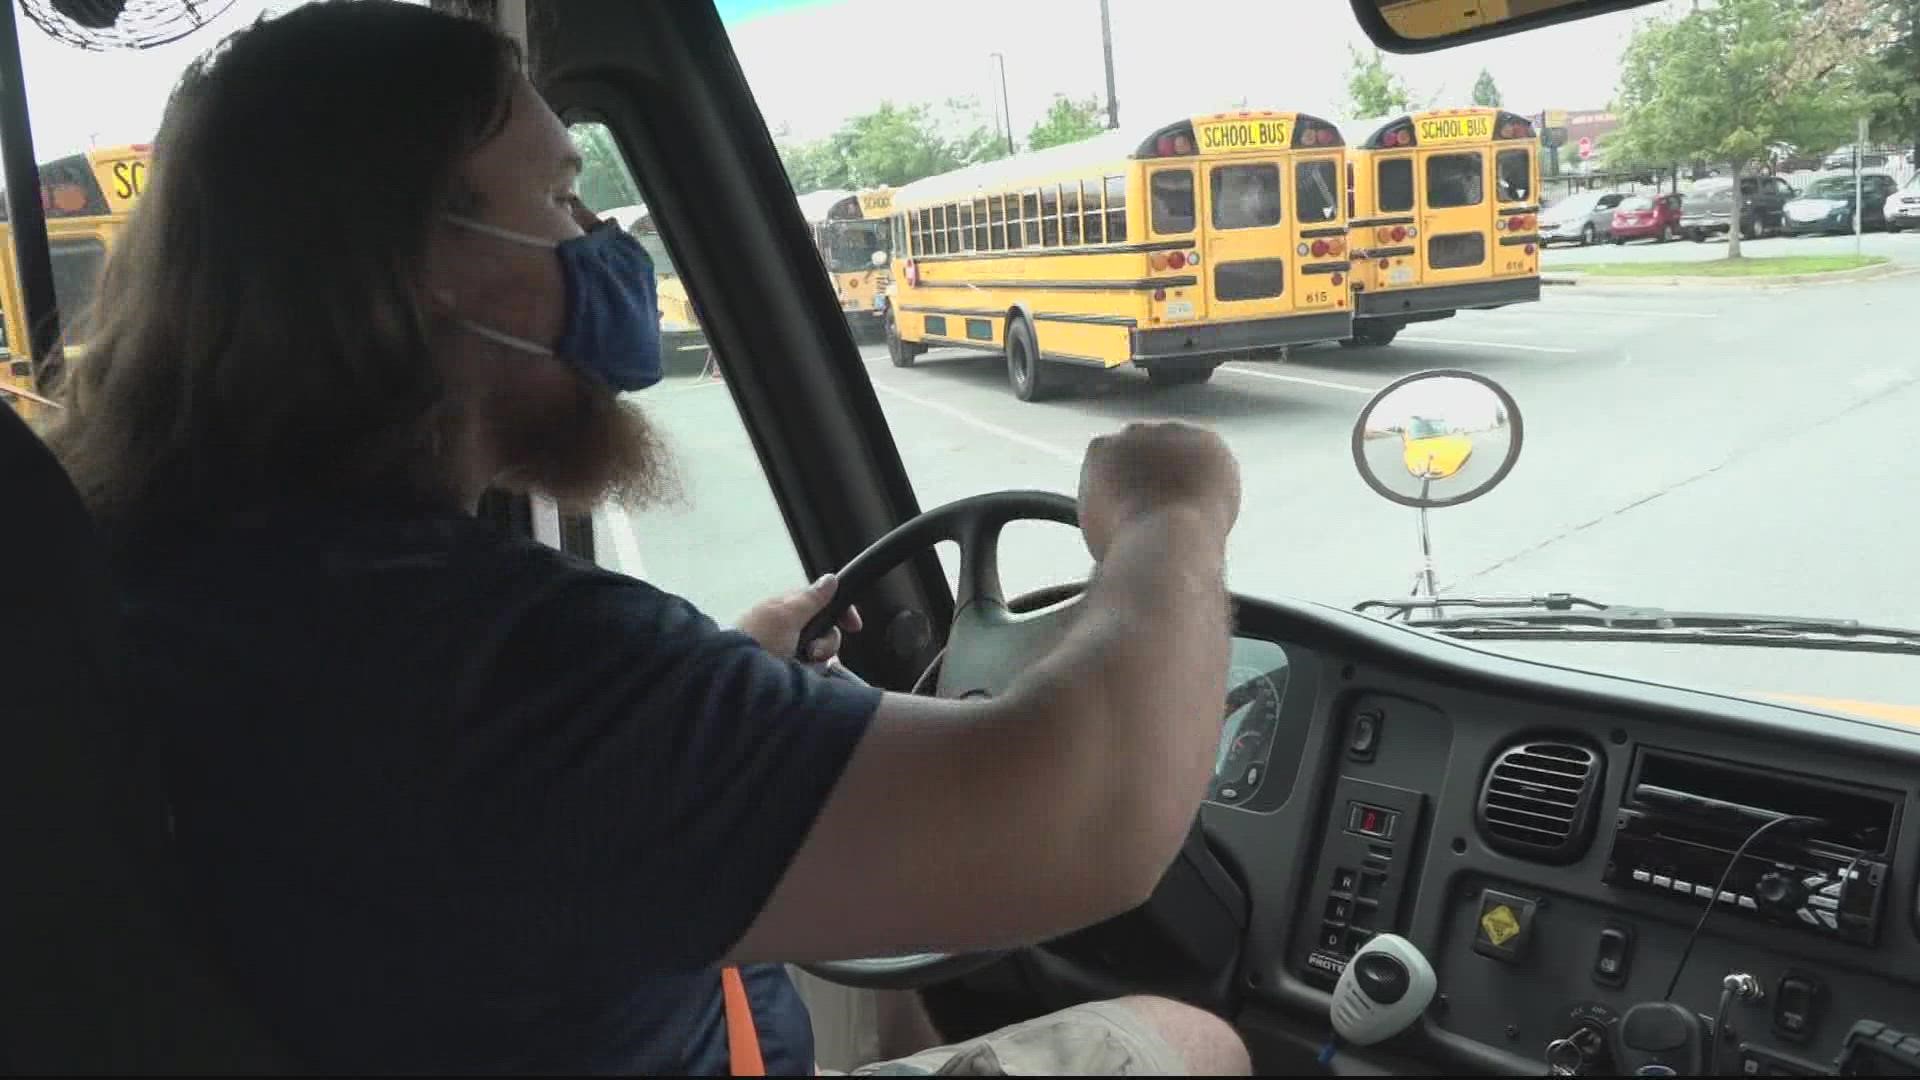 Not stopping for school buses when they have their lights on and stop sign extended is dangerous and against the law.